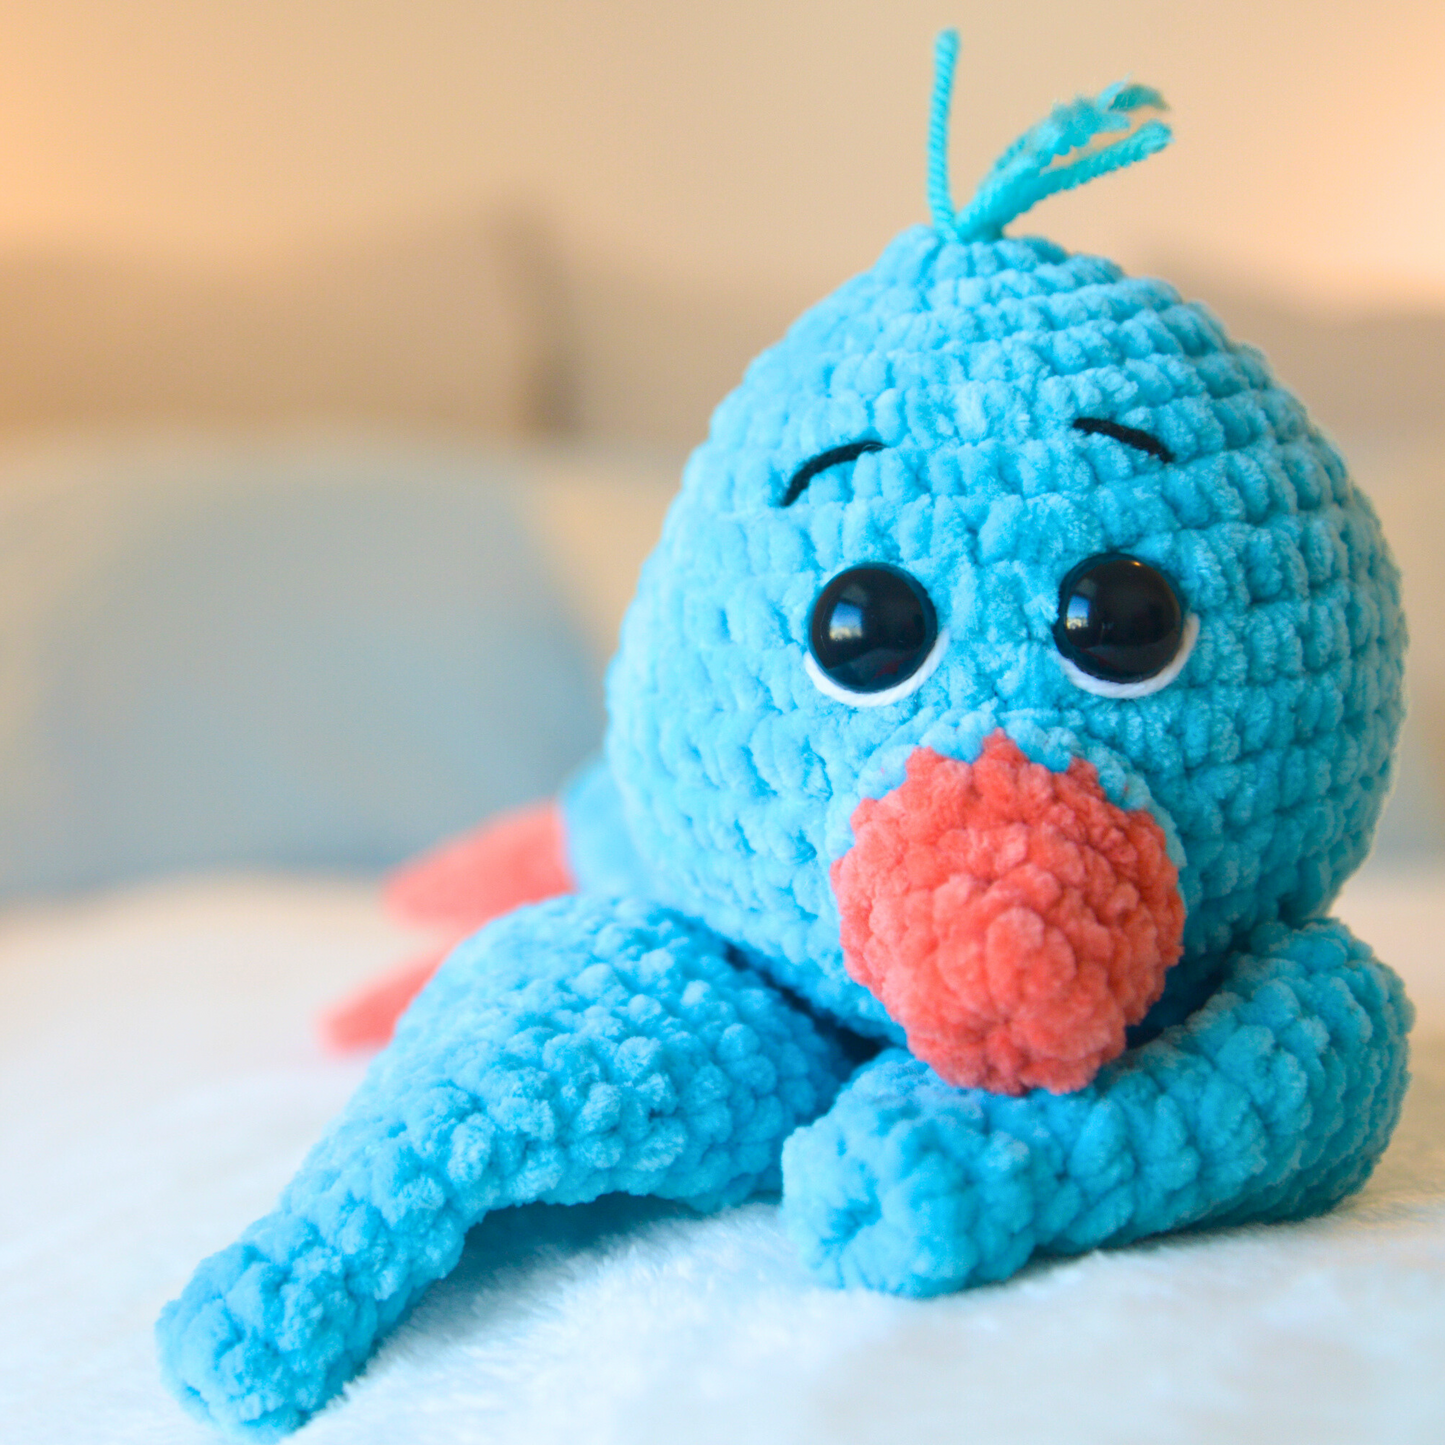 Bird Crochet Kit For Beginners With Pattern and Materials